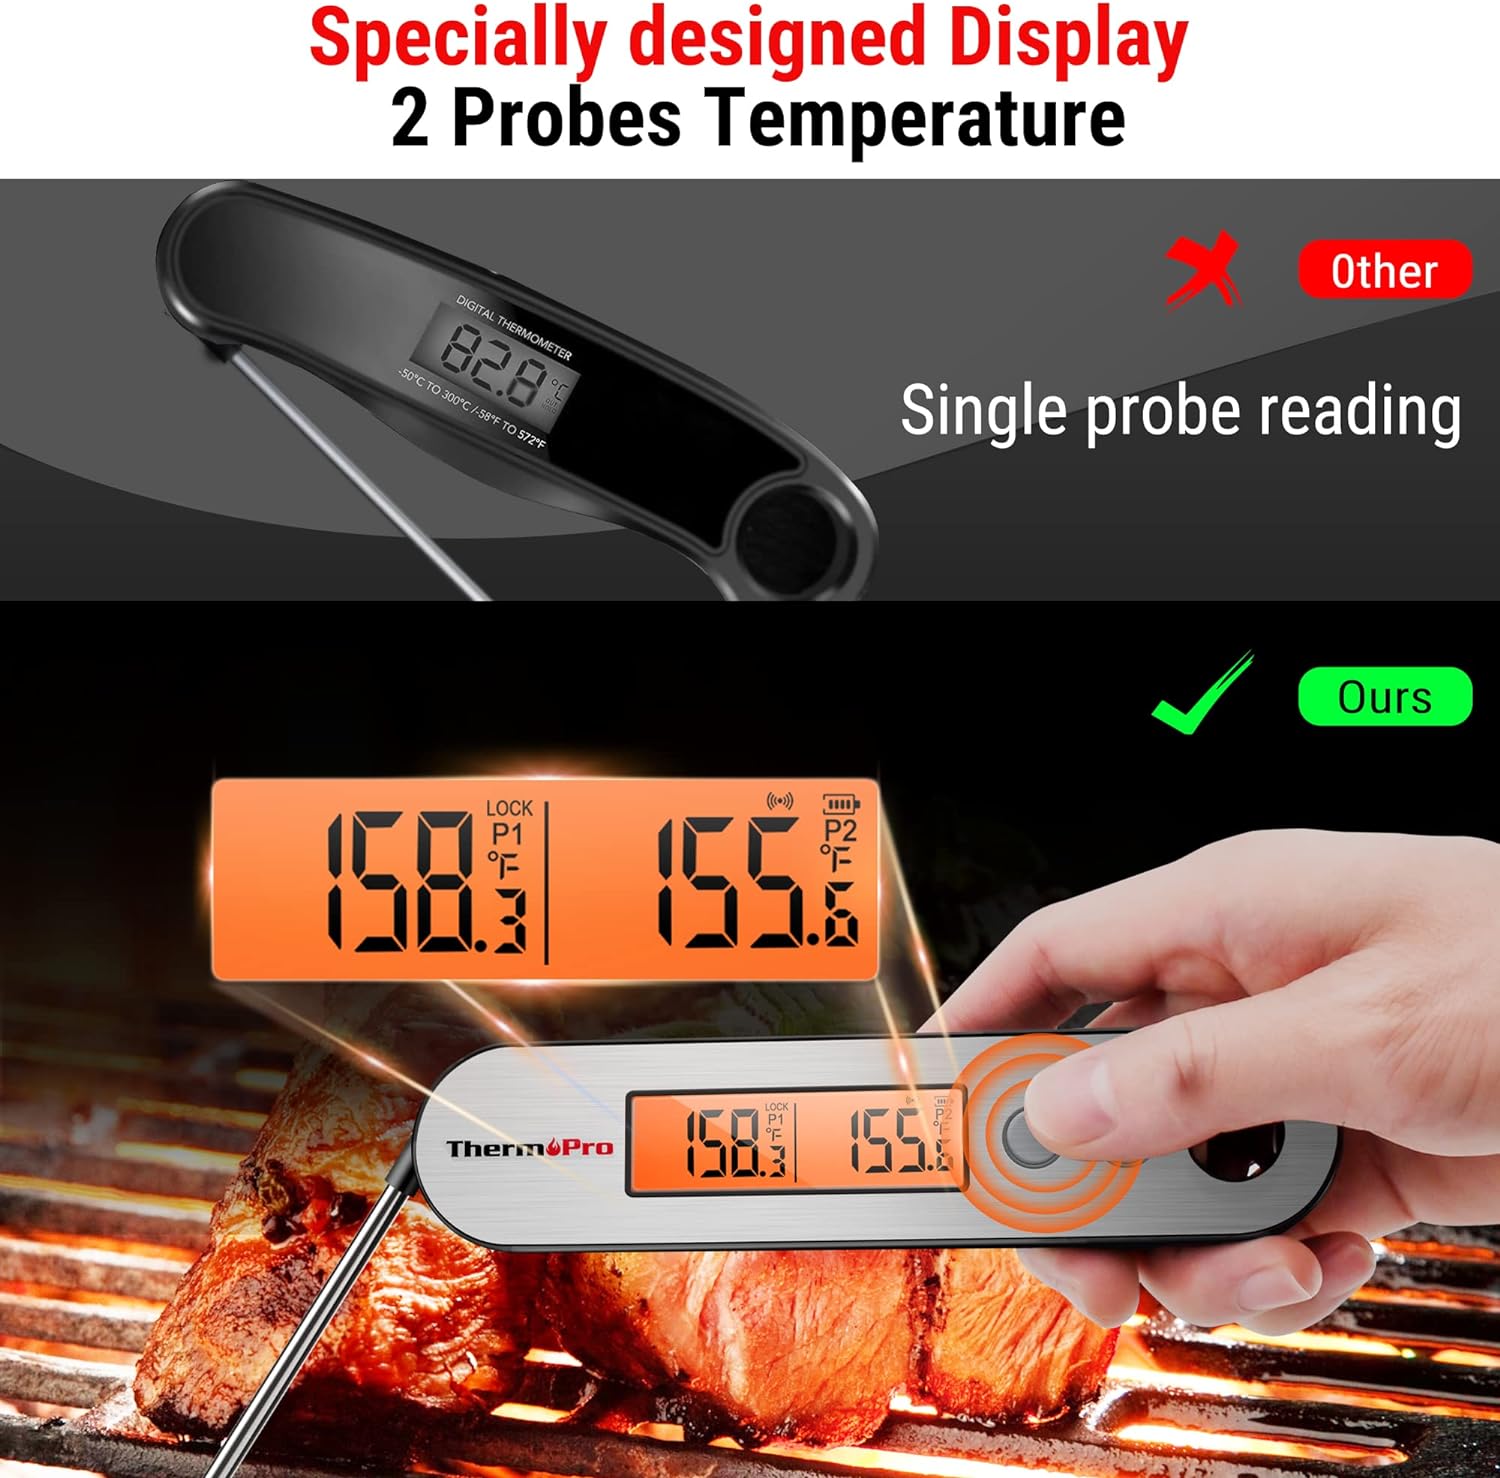 ThermoPro TP610 Digital Meat Thermometer for Cooking, Rechargeable Instant Read Food Thermometer with Rotating LCD Screen, Waterproof Cooking Thermometer with Alarm for Grilling, Smoker, BBQ, Oven